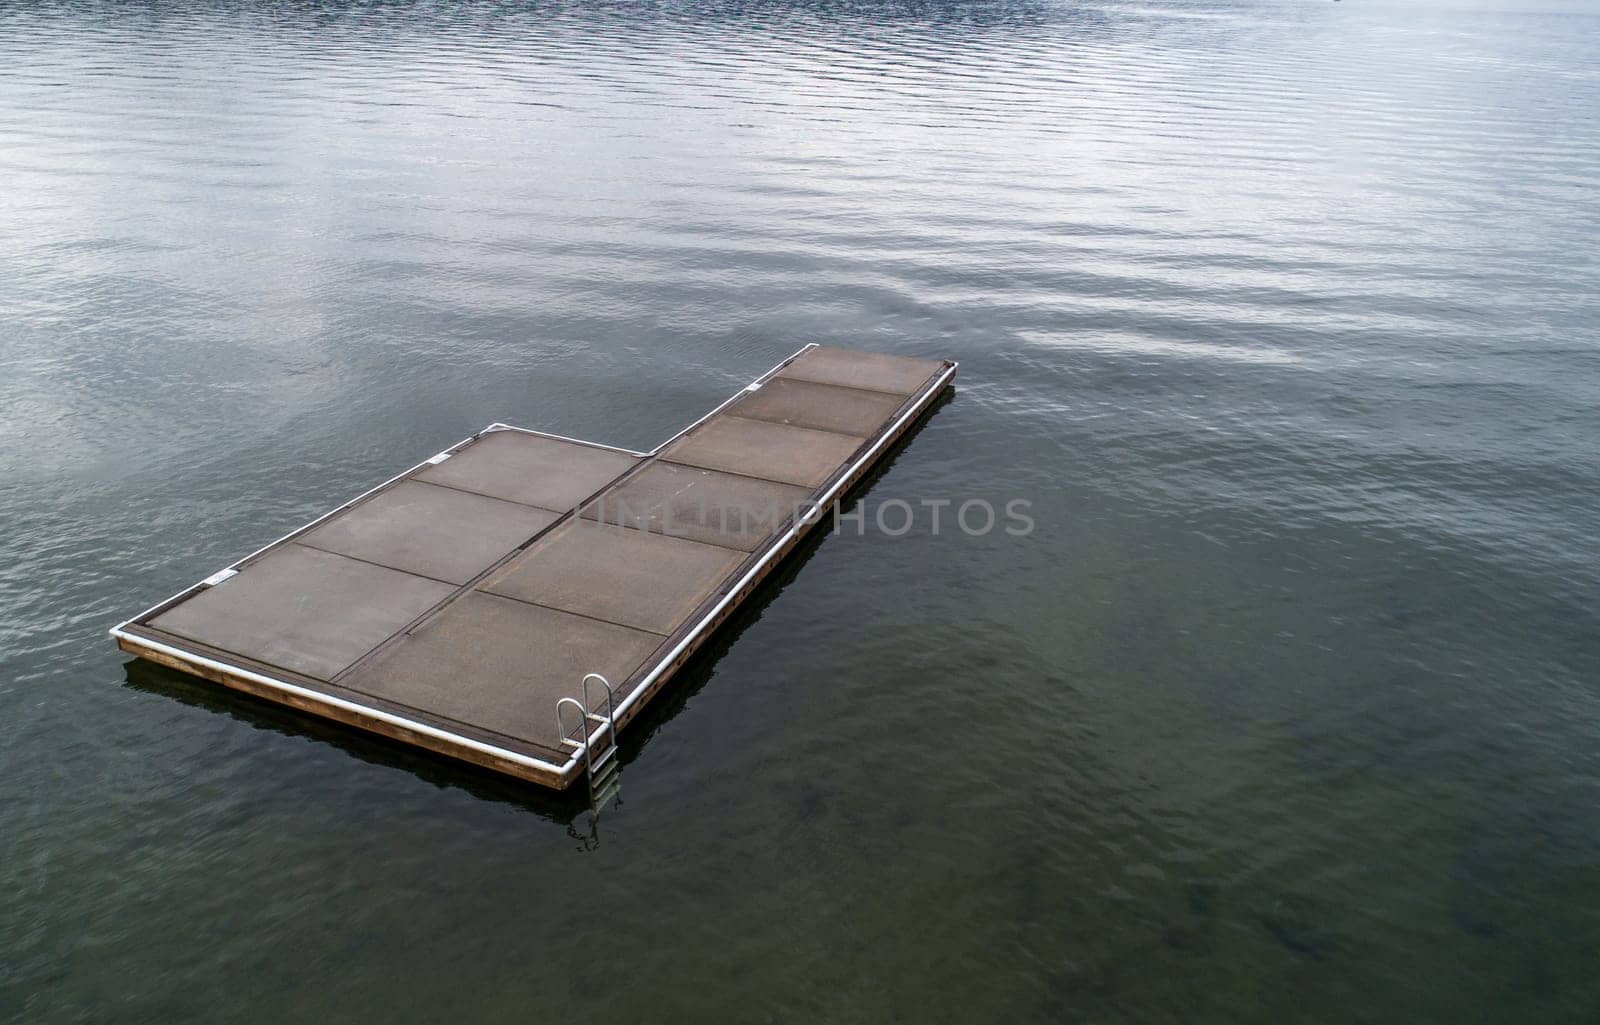 platform used for swimming in an empty lake during a cold day